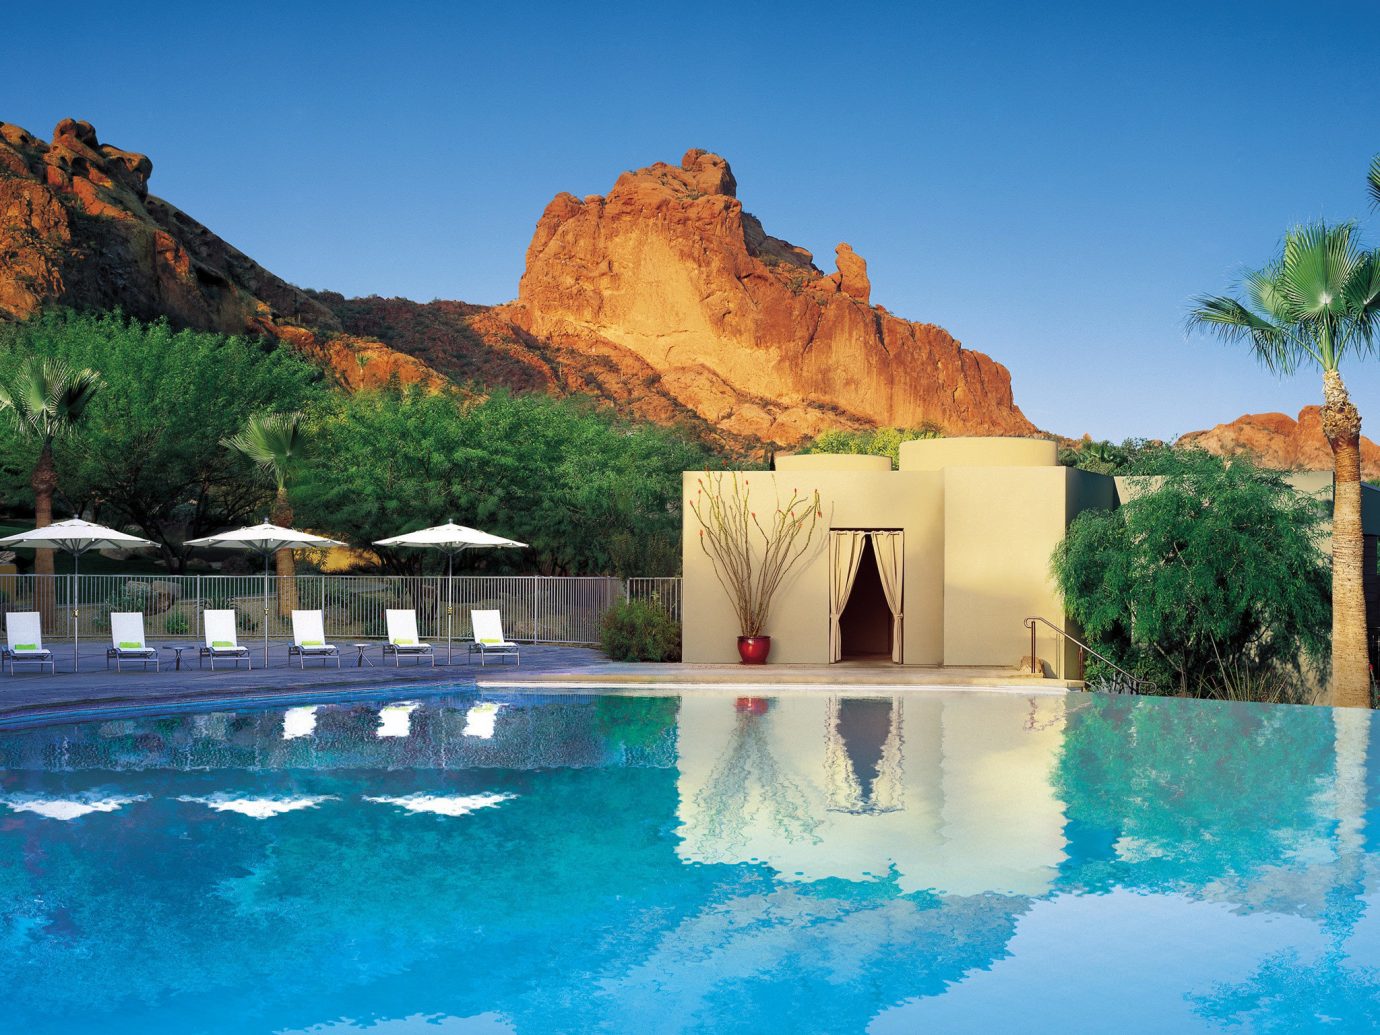 Pool at Sanctuary on Camelback Mountain Resort and Spa